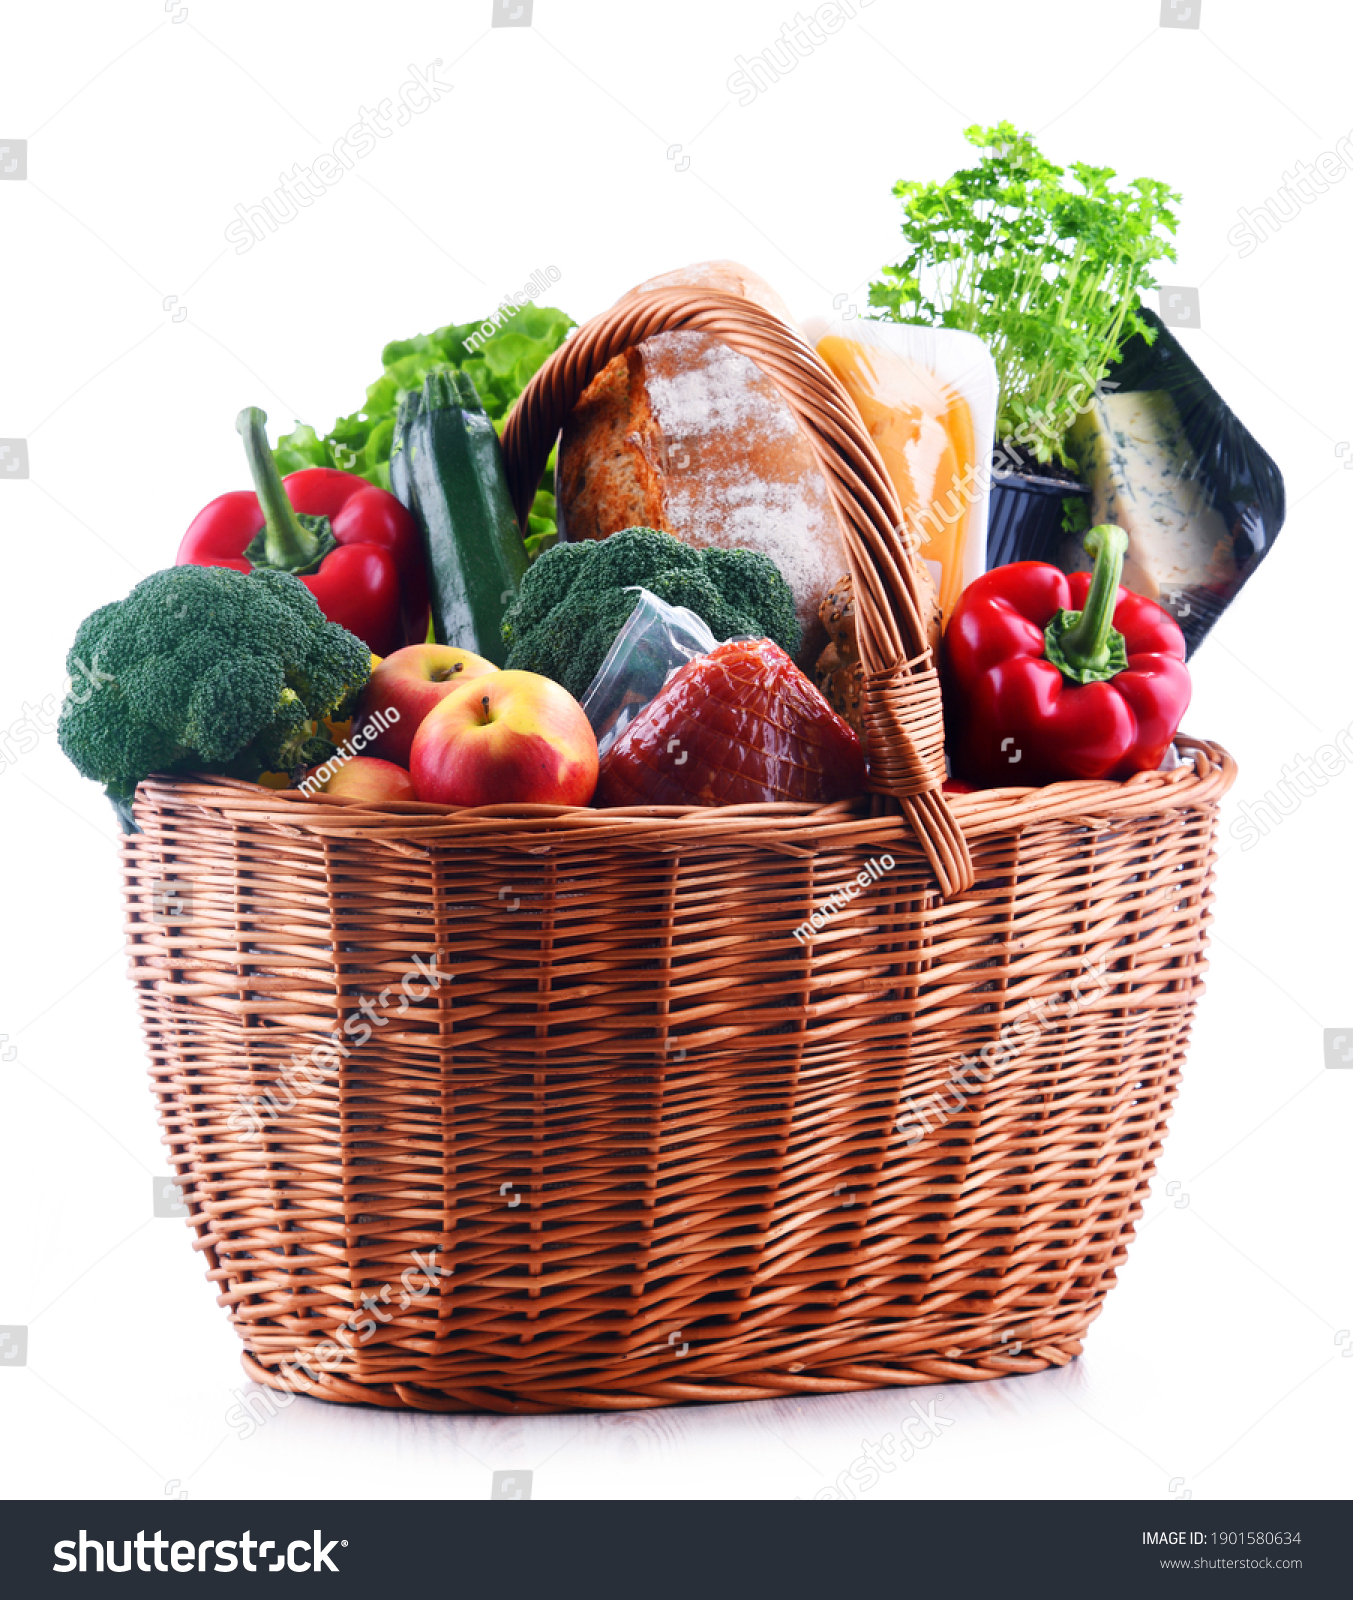 Wicker basket with assorted grocery products isolated on white background #1901580634